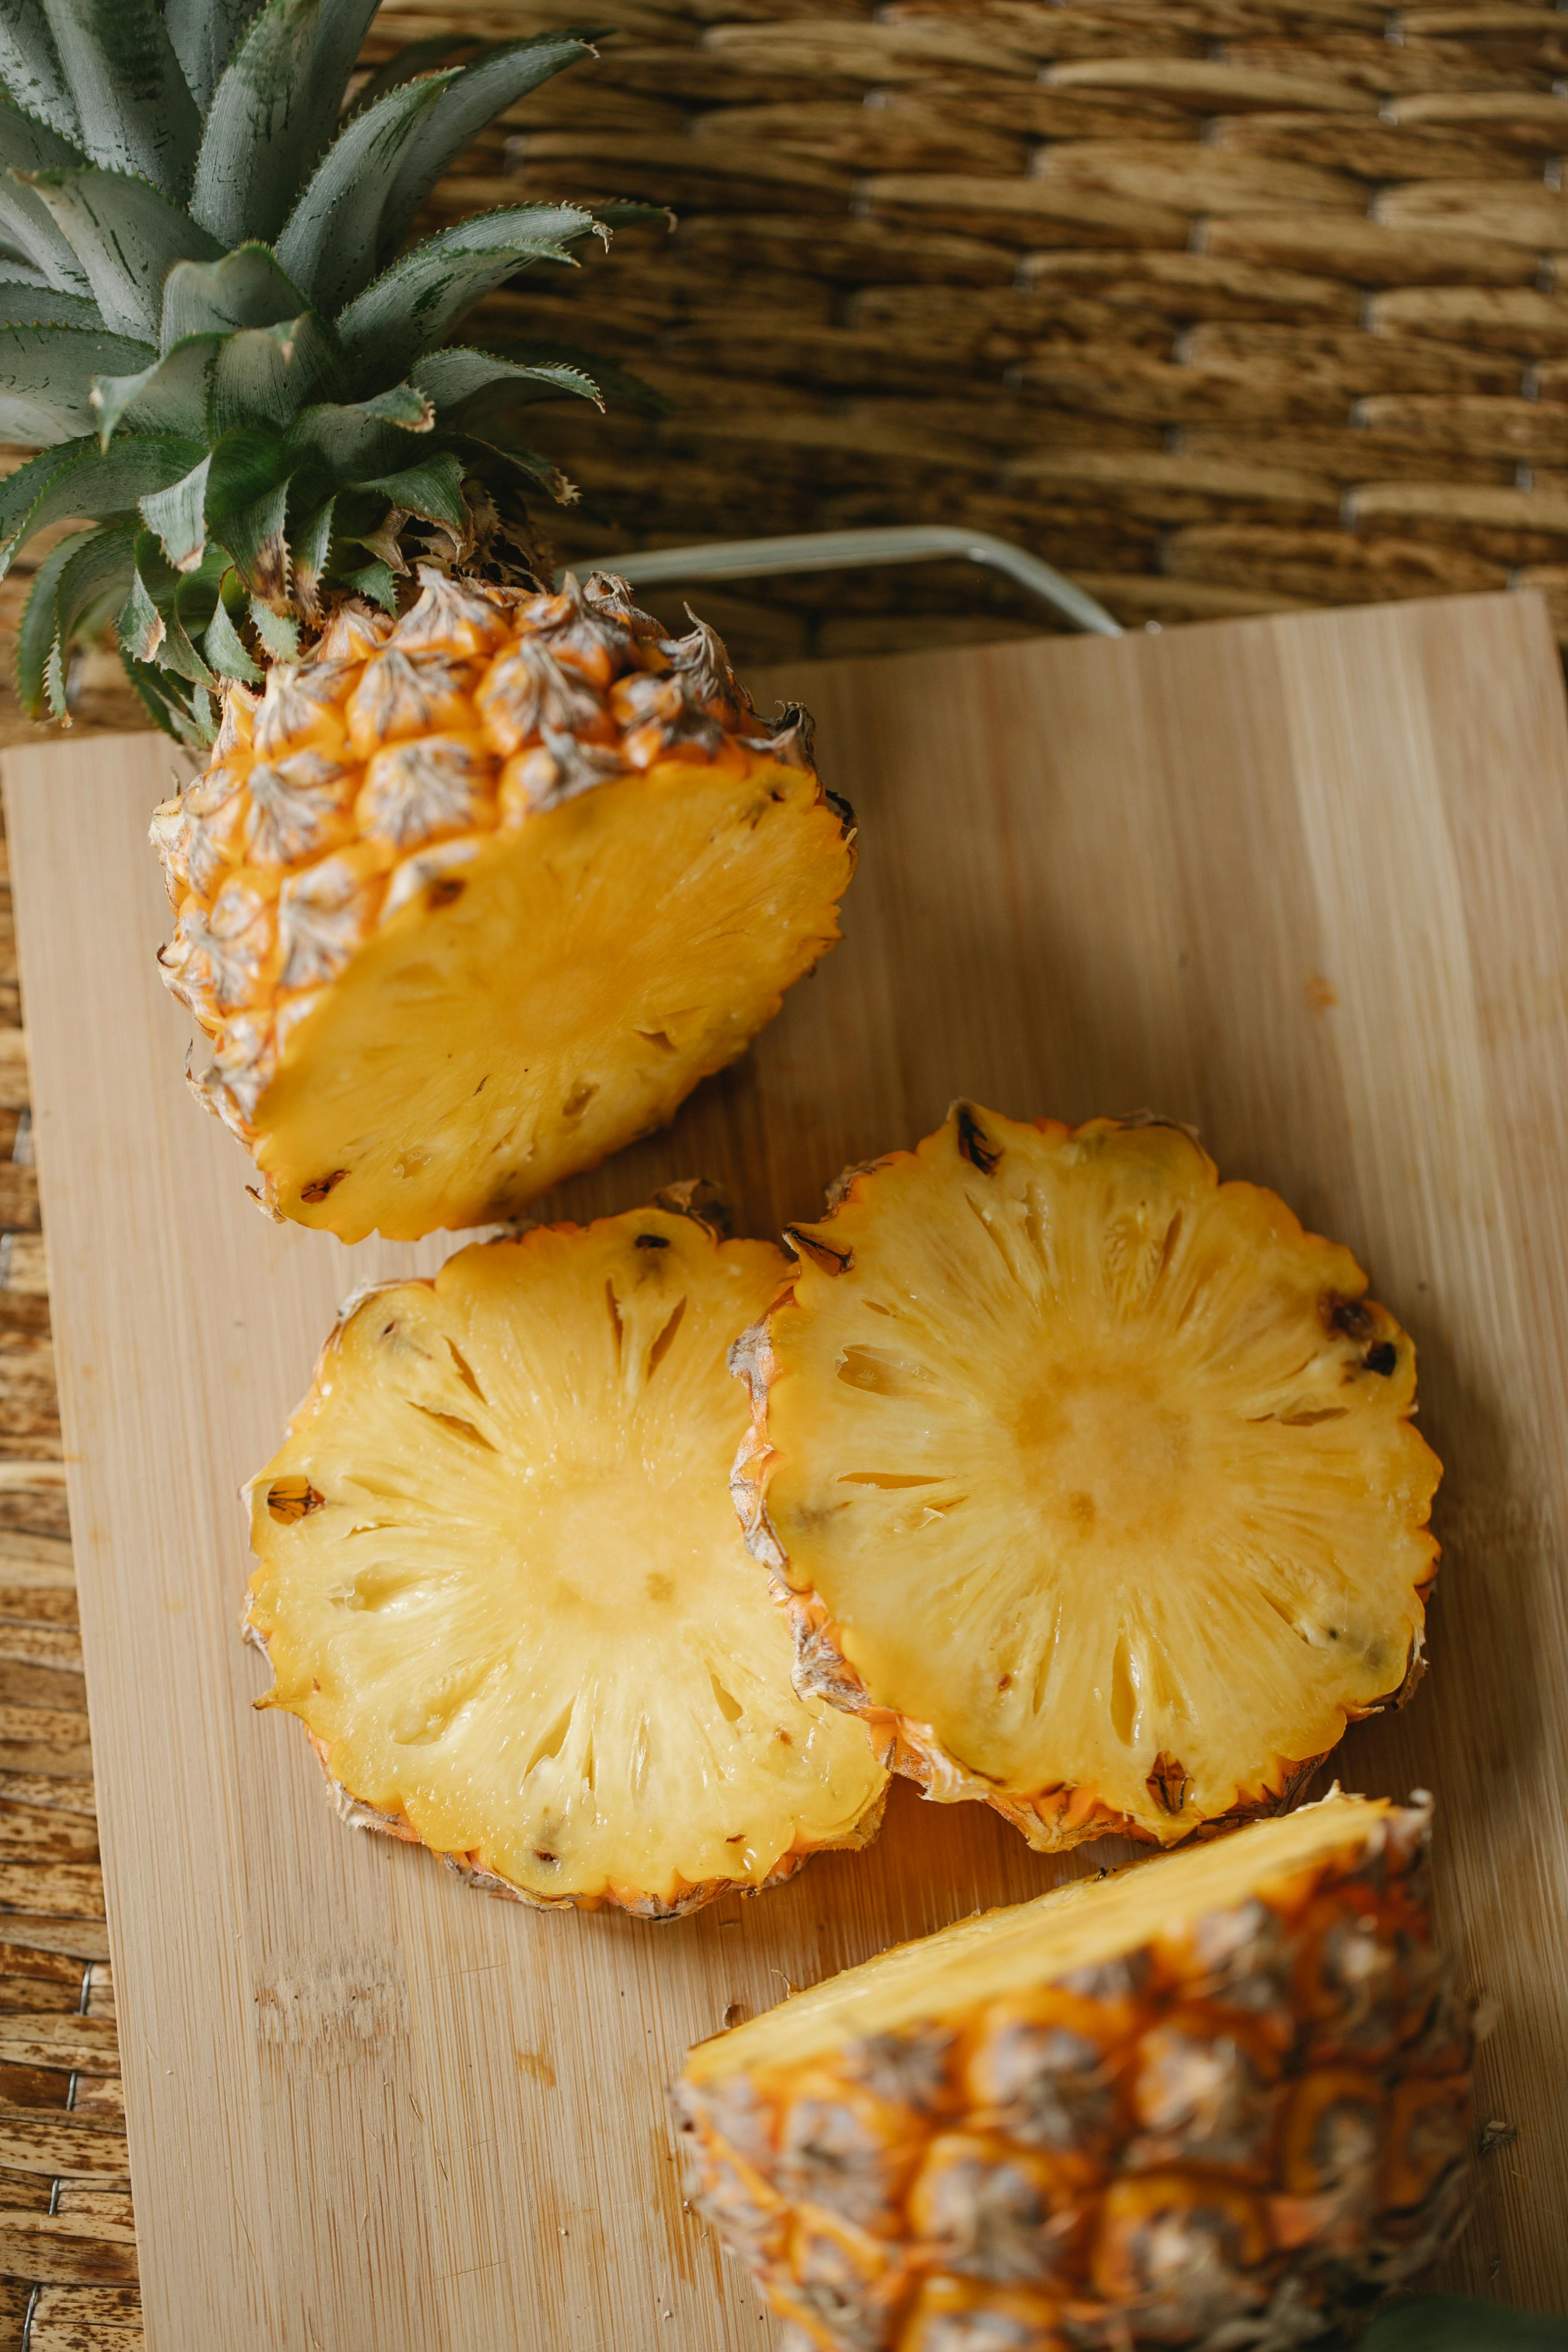 slices of pineapple on board